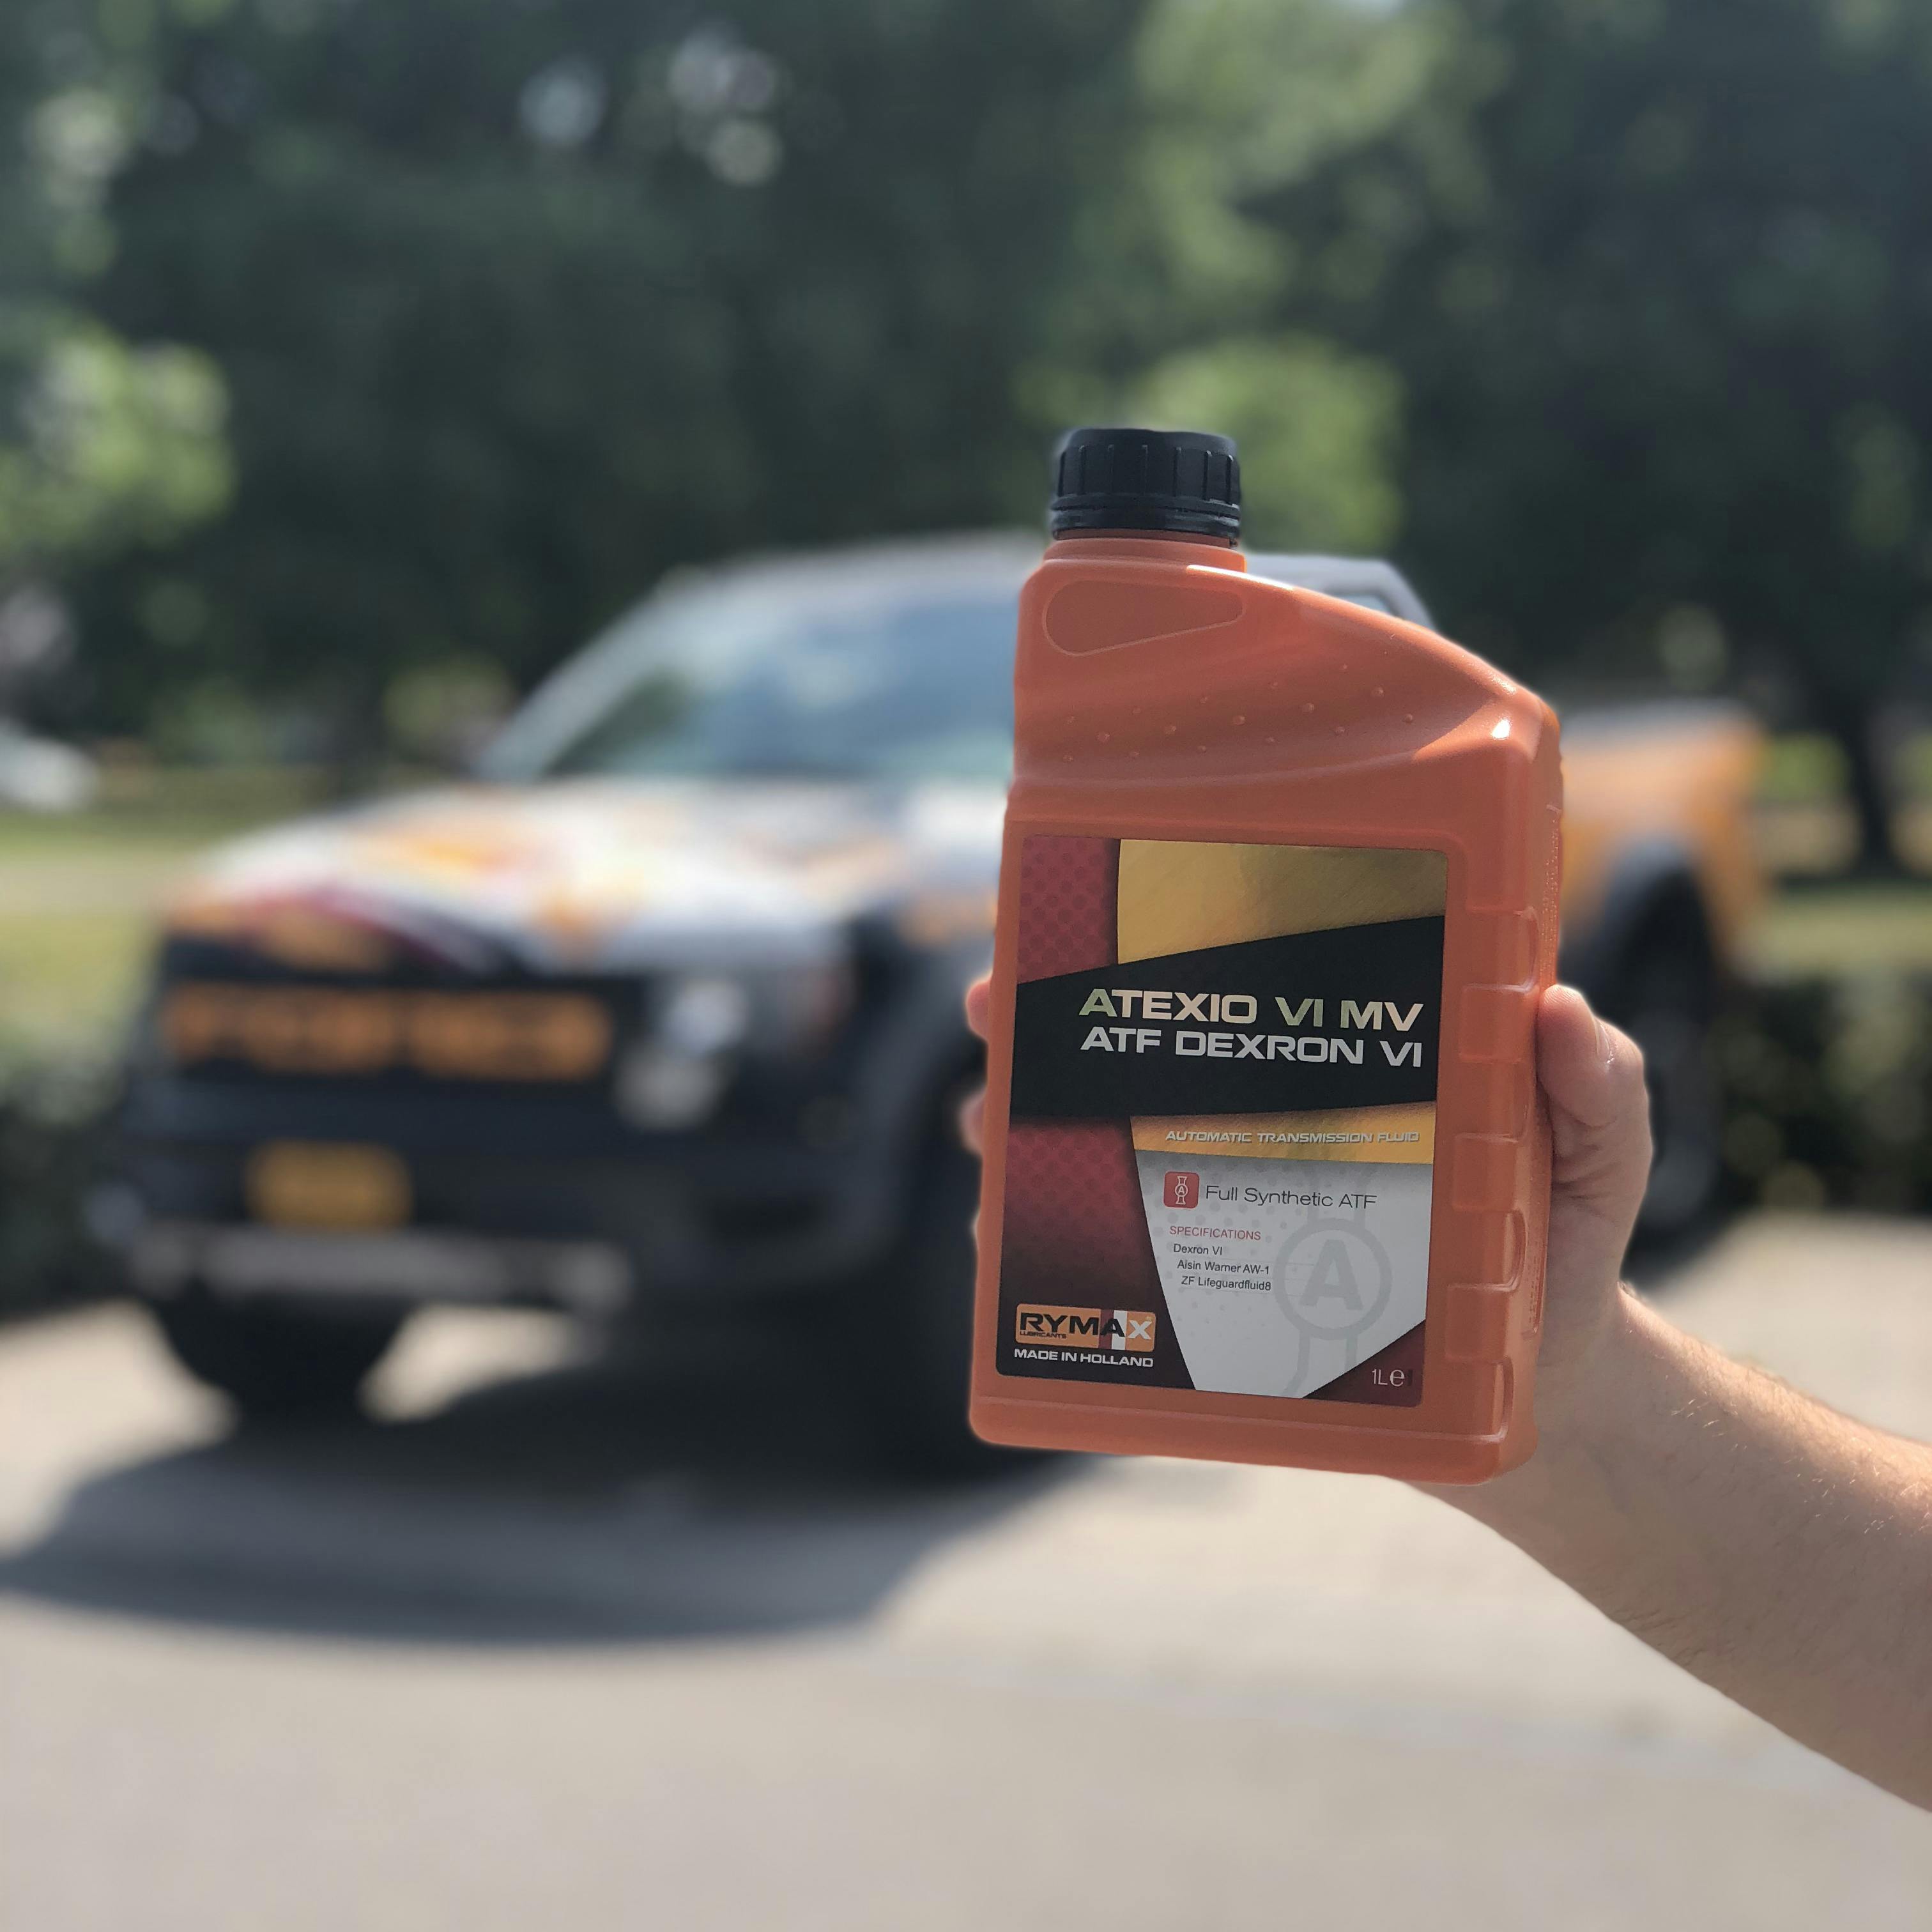 Fluid to use on Transmission Fluid Changes?